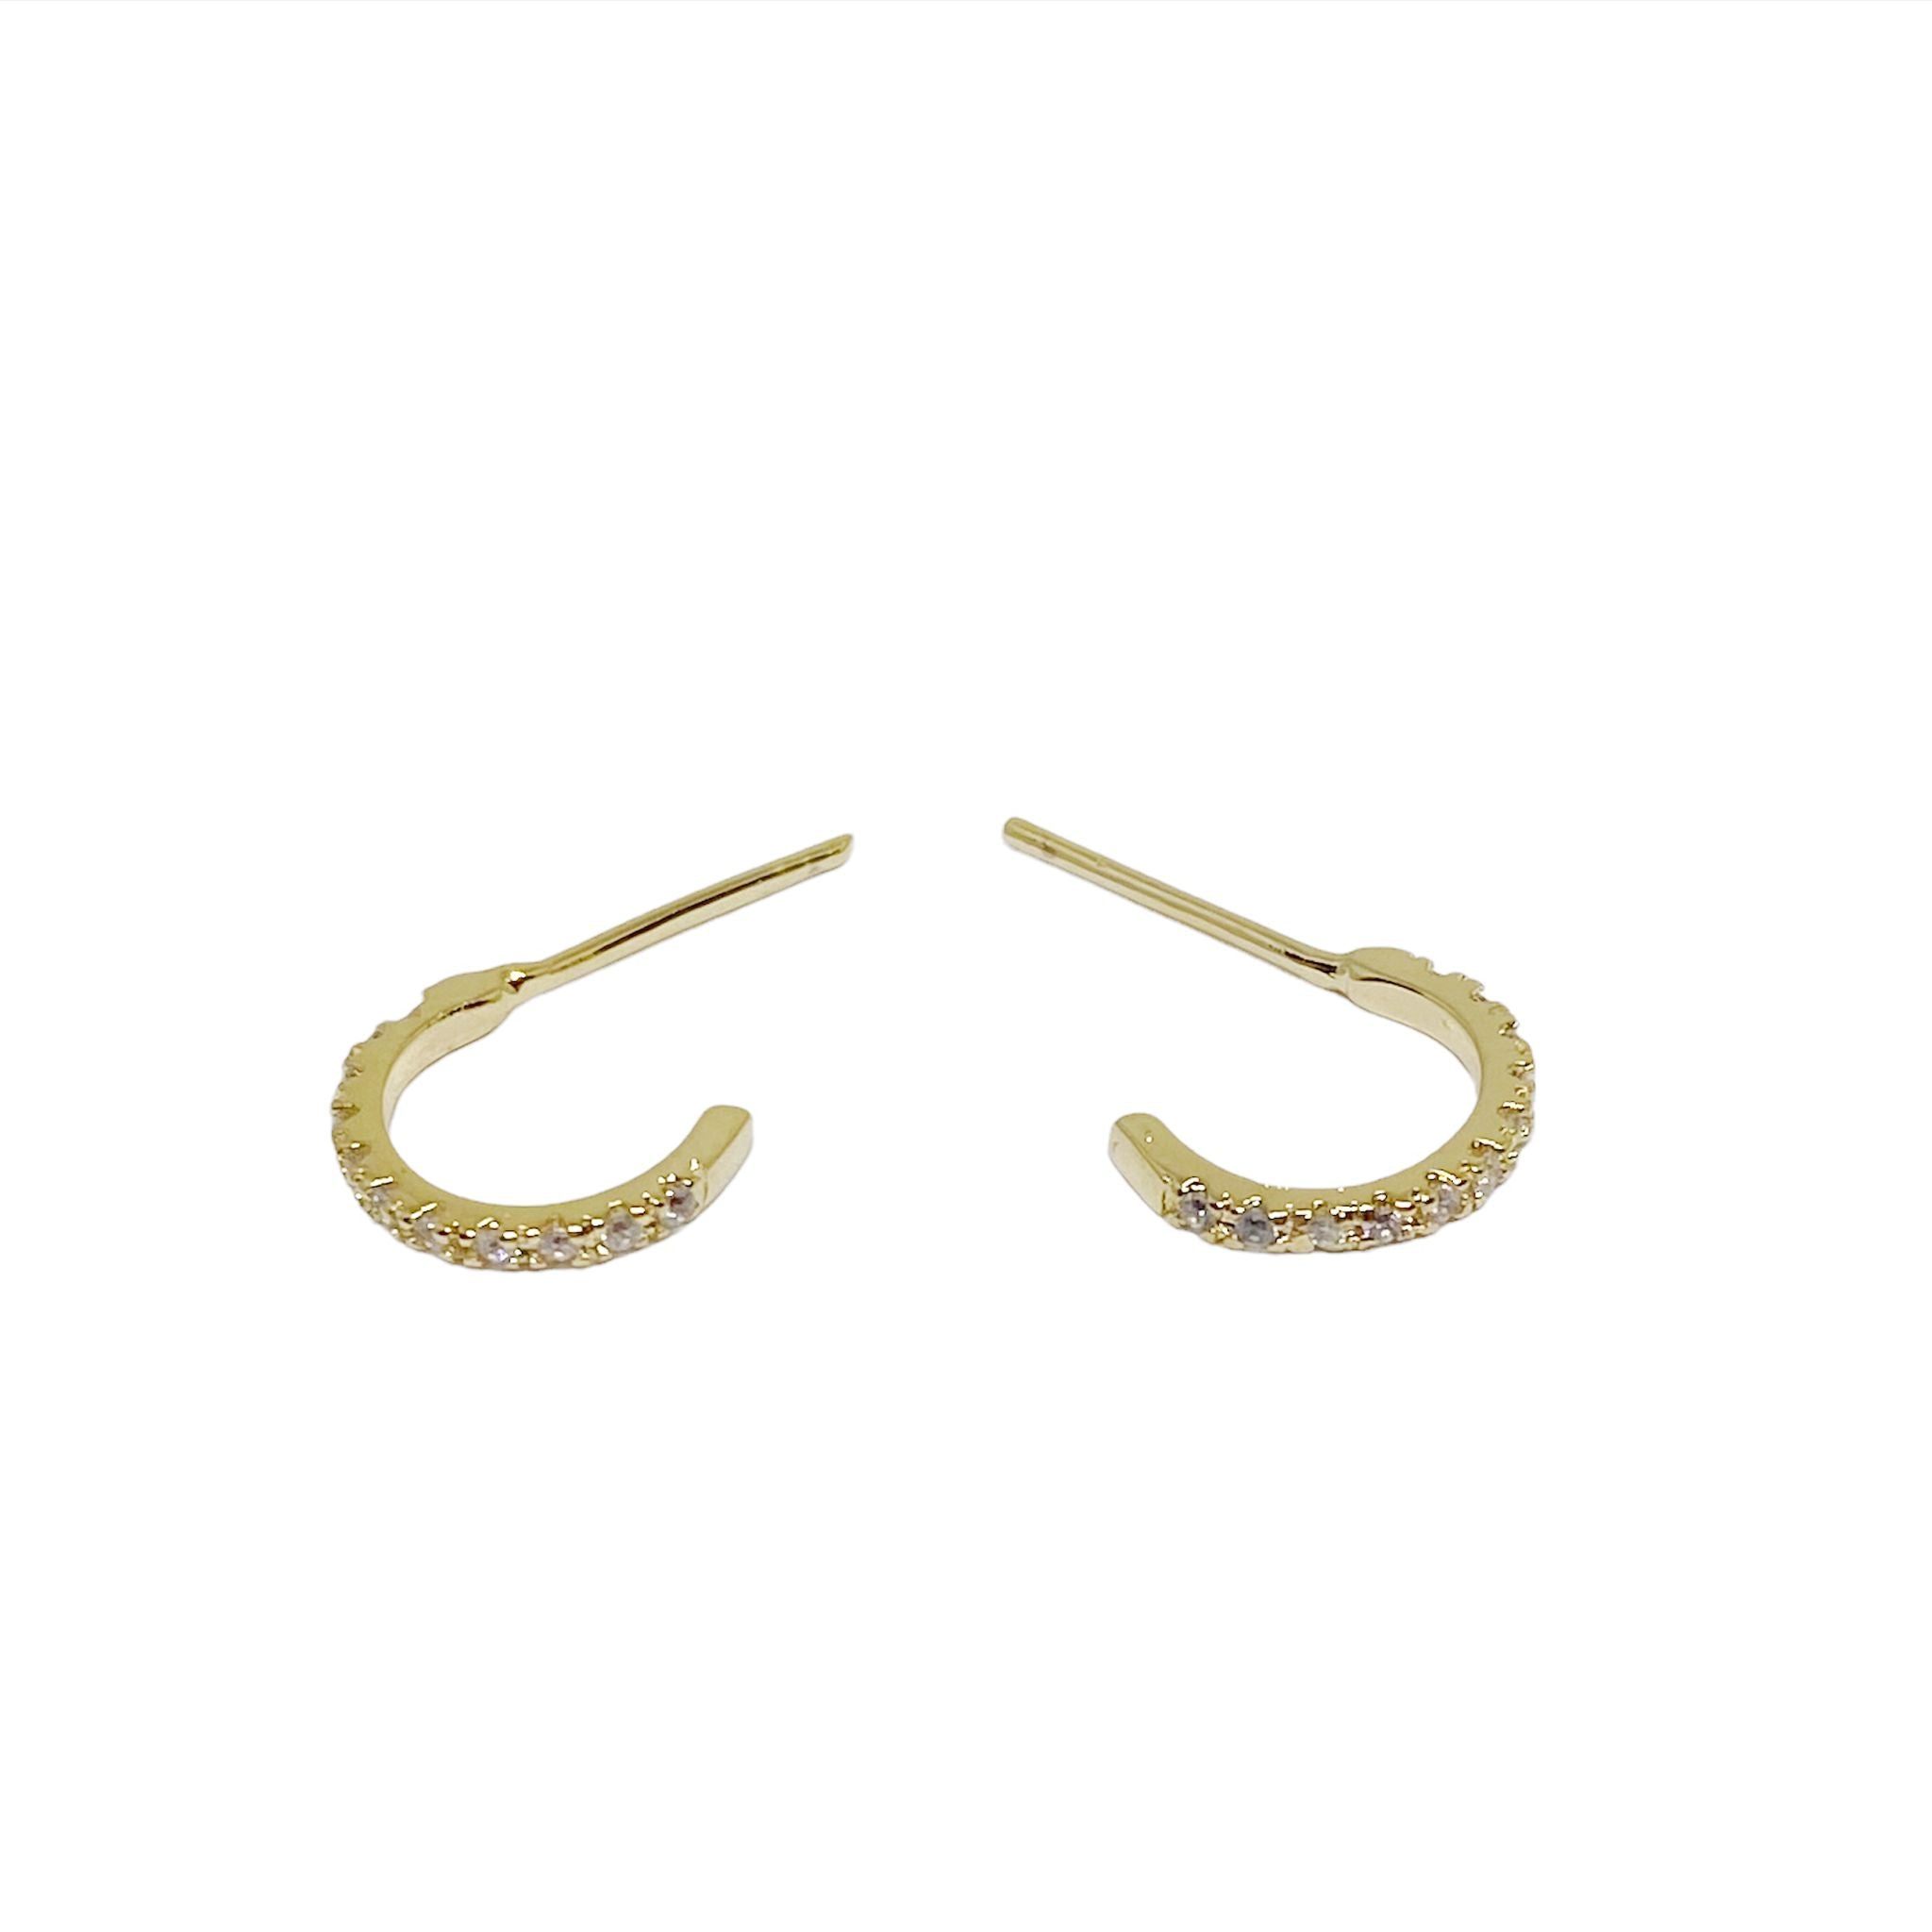 Dazzle and Delight: Sprinkles C-Hoops Earrings for the Ultimate Glam Statement!